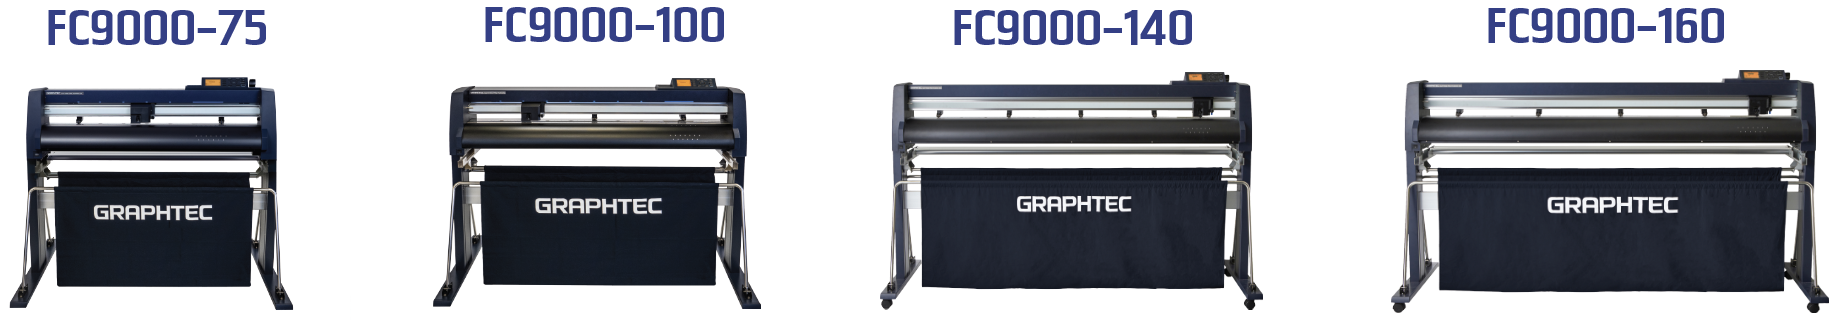 Graphtec FC9000 30 Commercial Vinyl Cutter with Stand